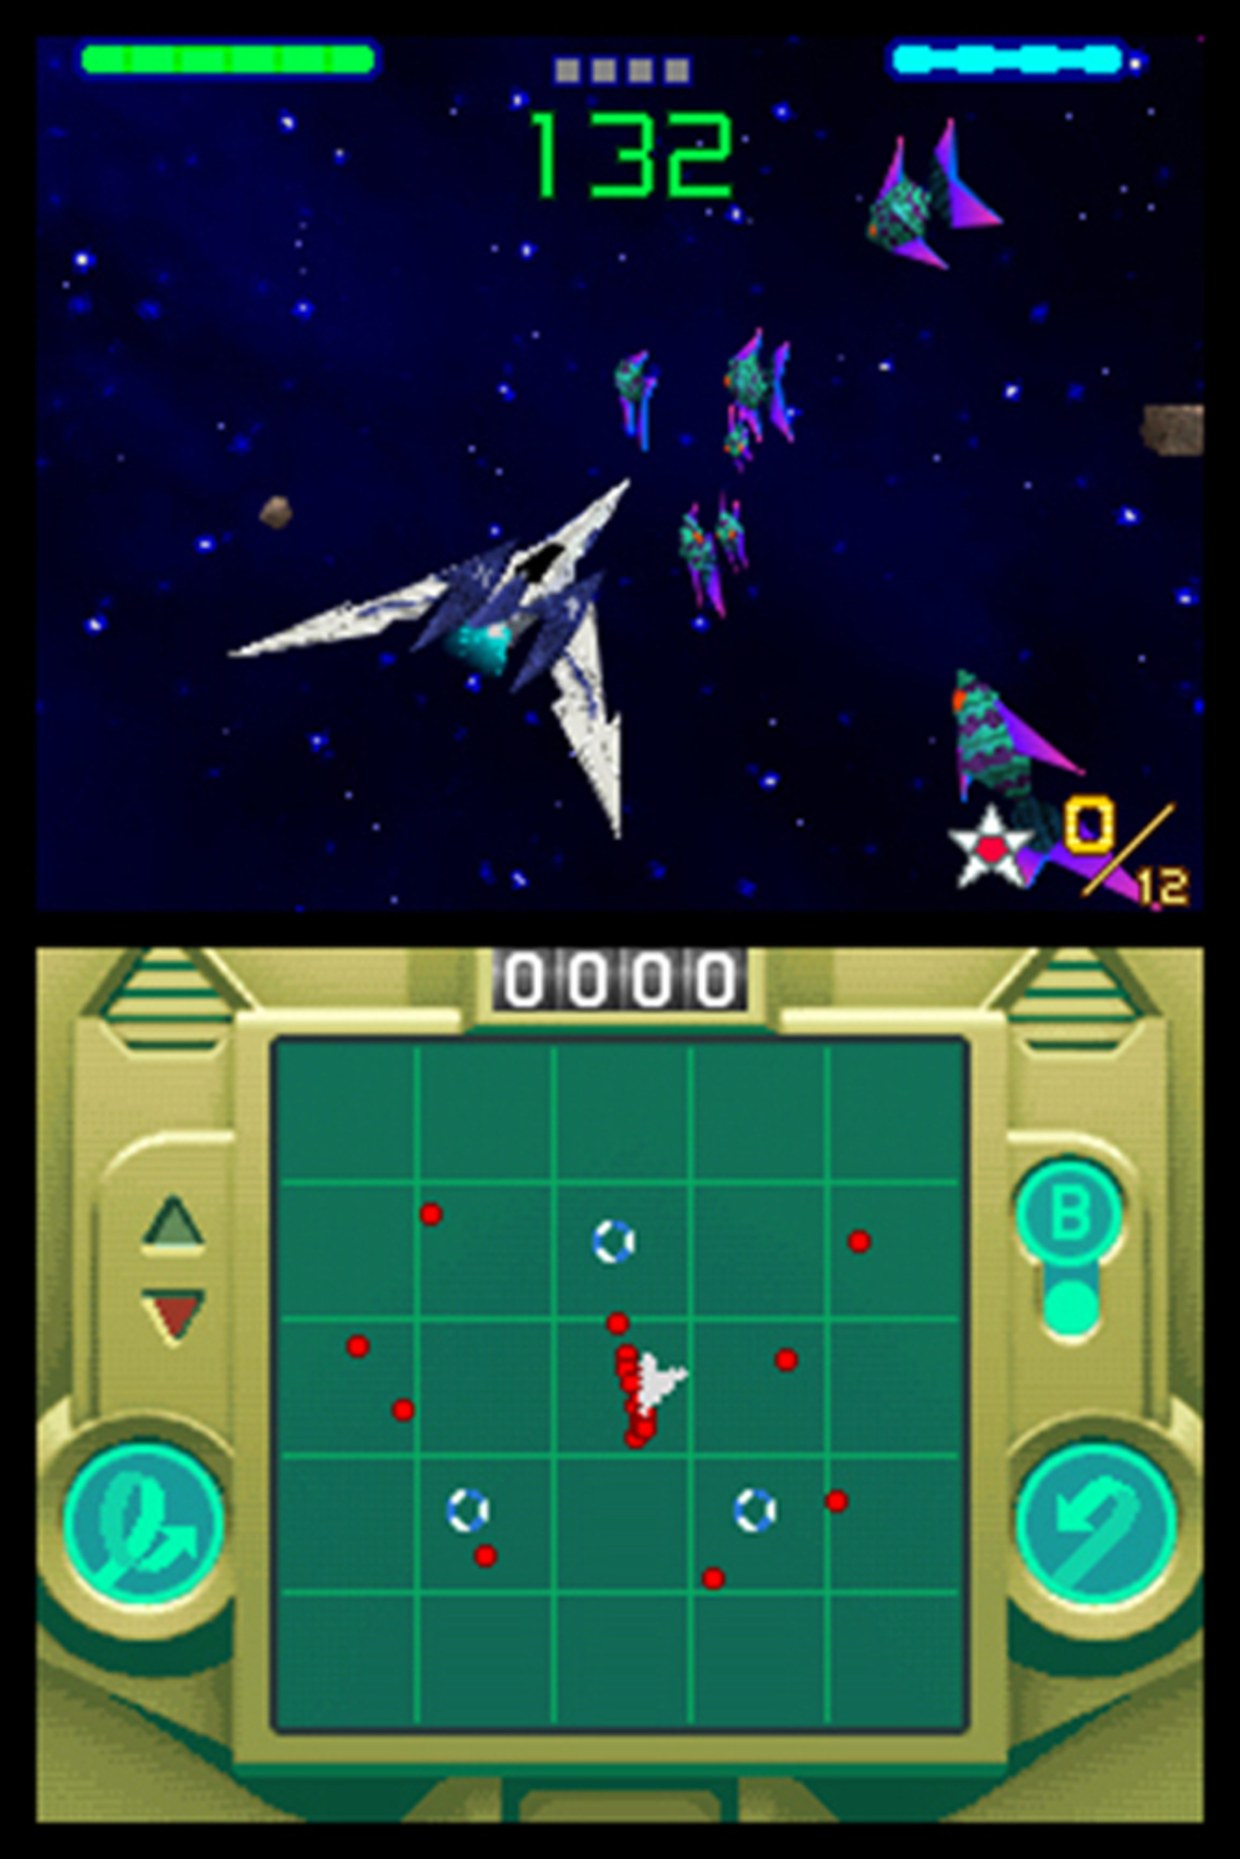 Nintendo World Report on X: 15 Years ago today, Star Fox Command launched  in North America. Join @jtsknight92 for an in depth look at the development  of the game as told by